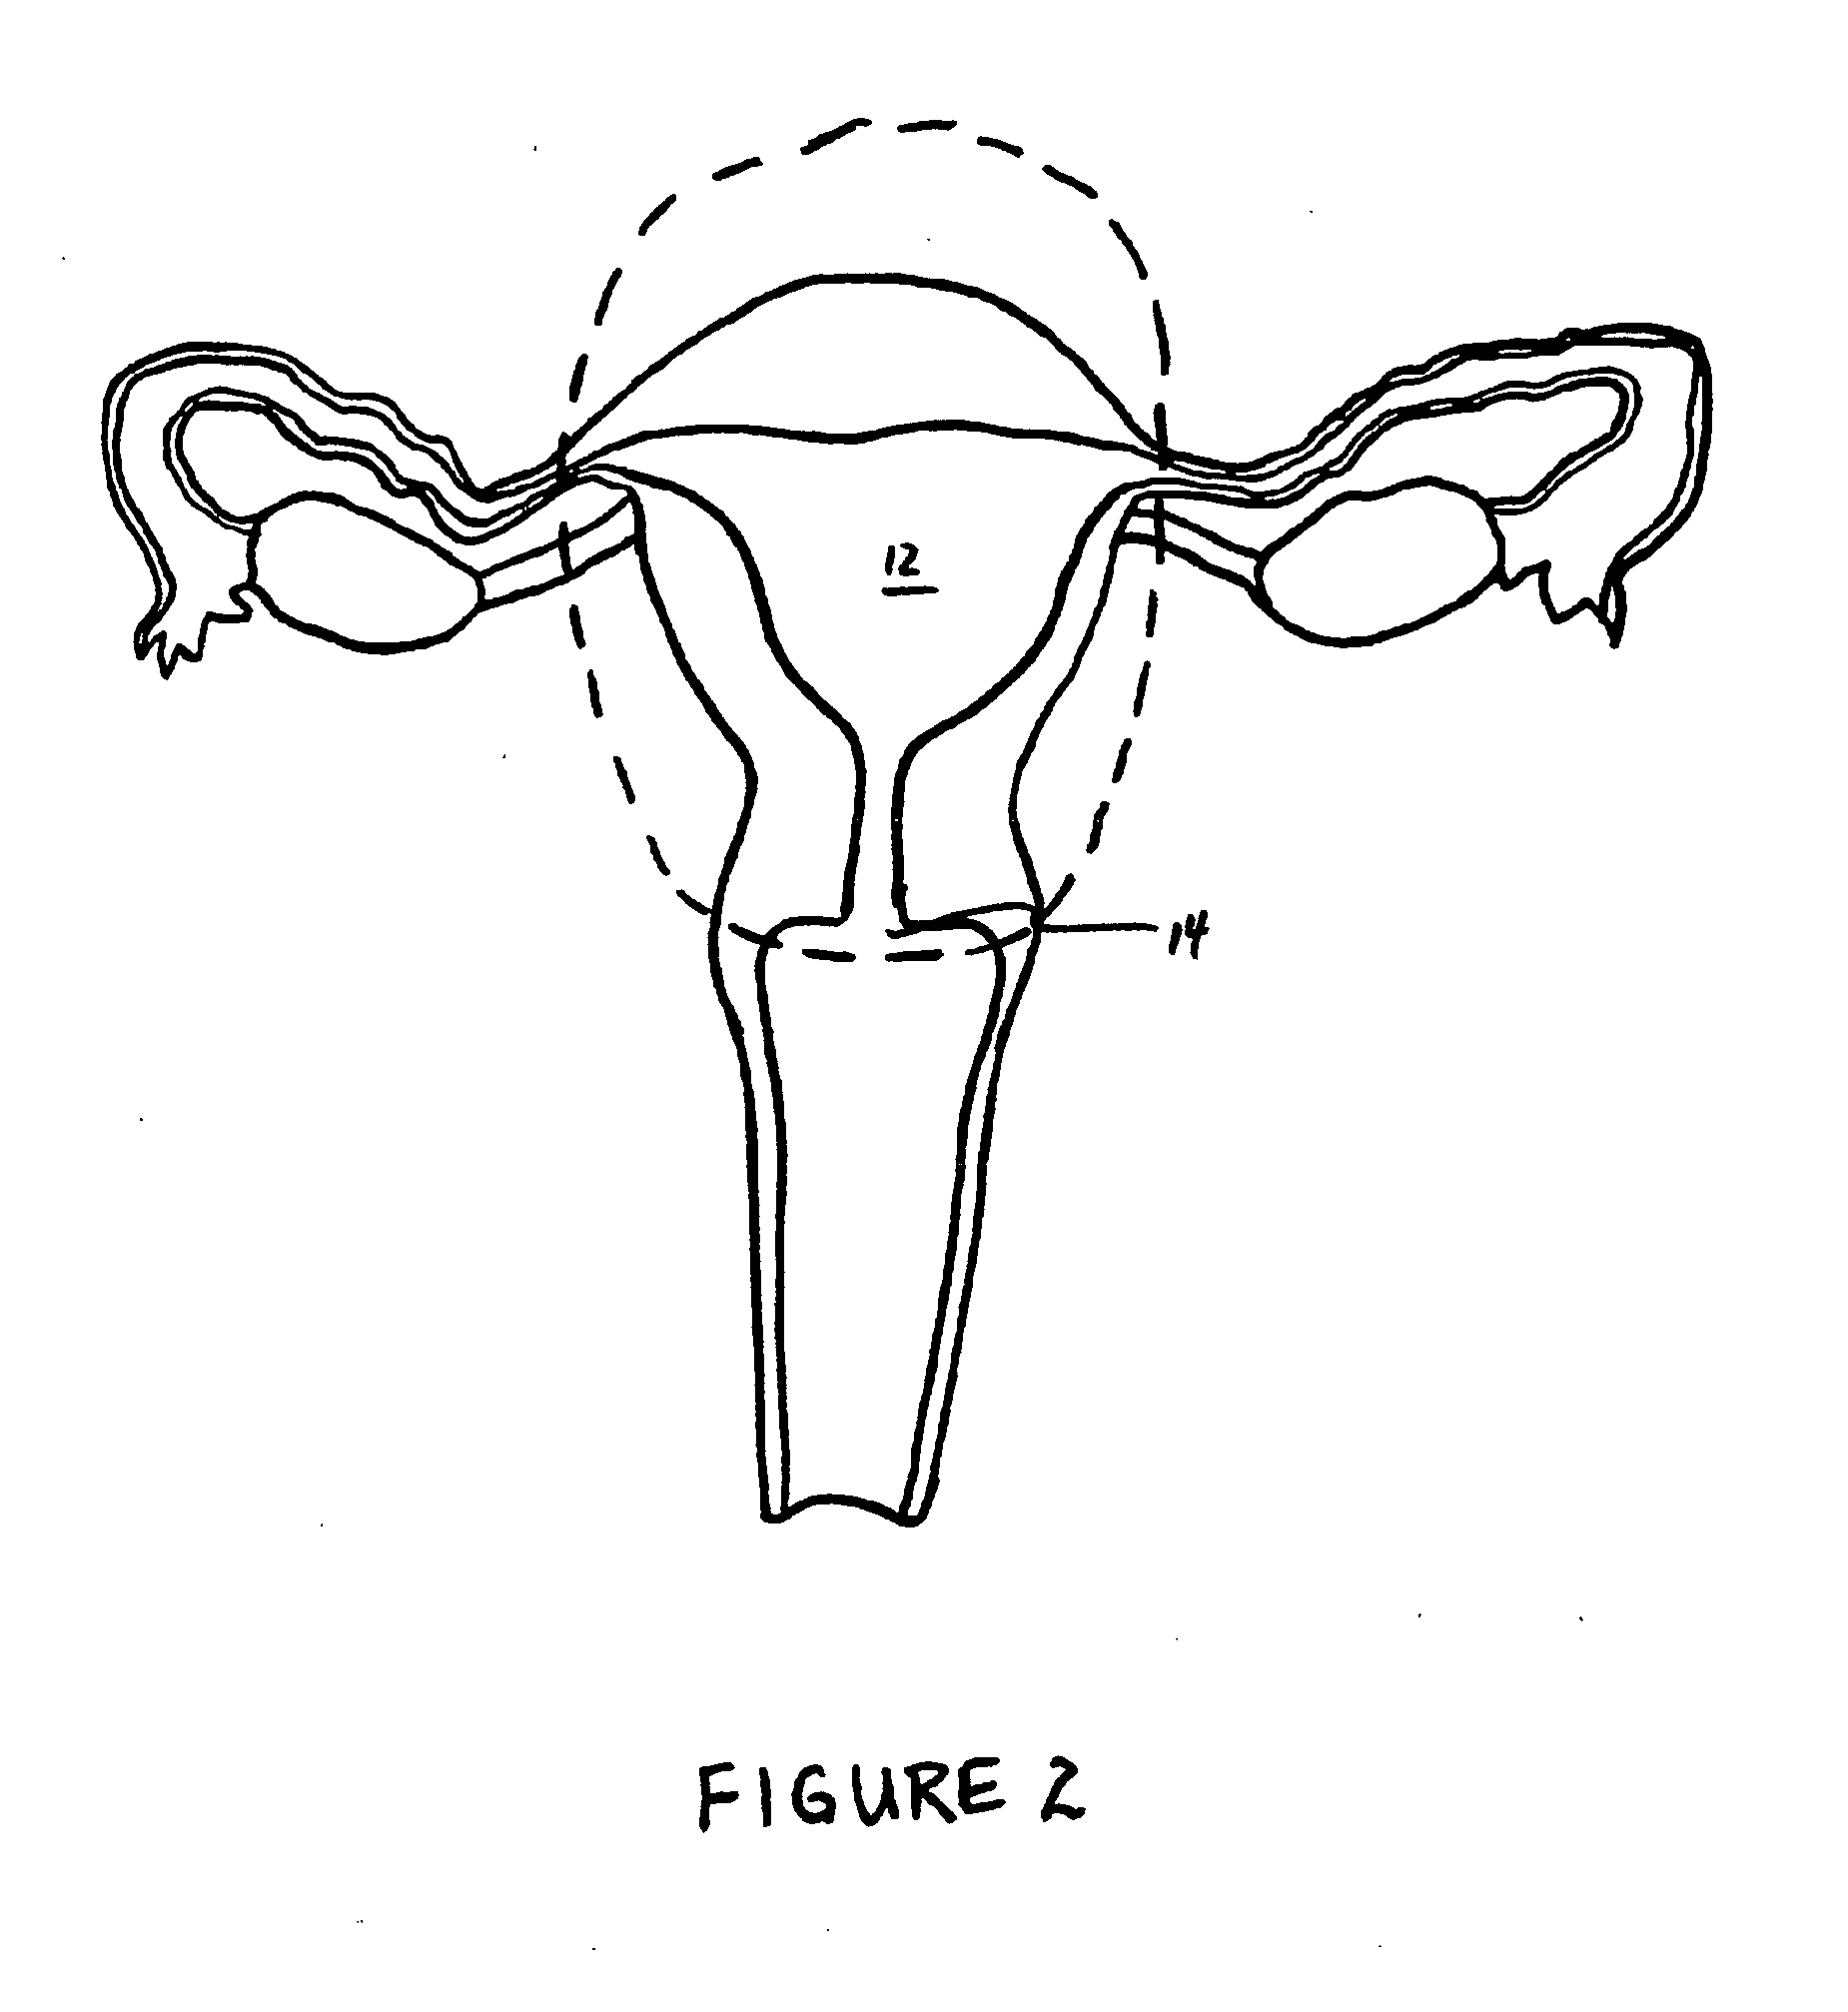 Intrauterine implant and methods of use